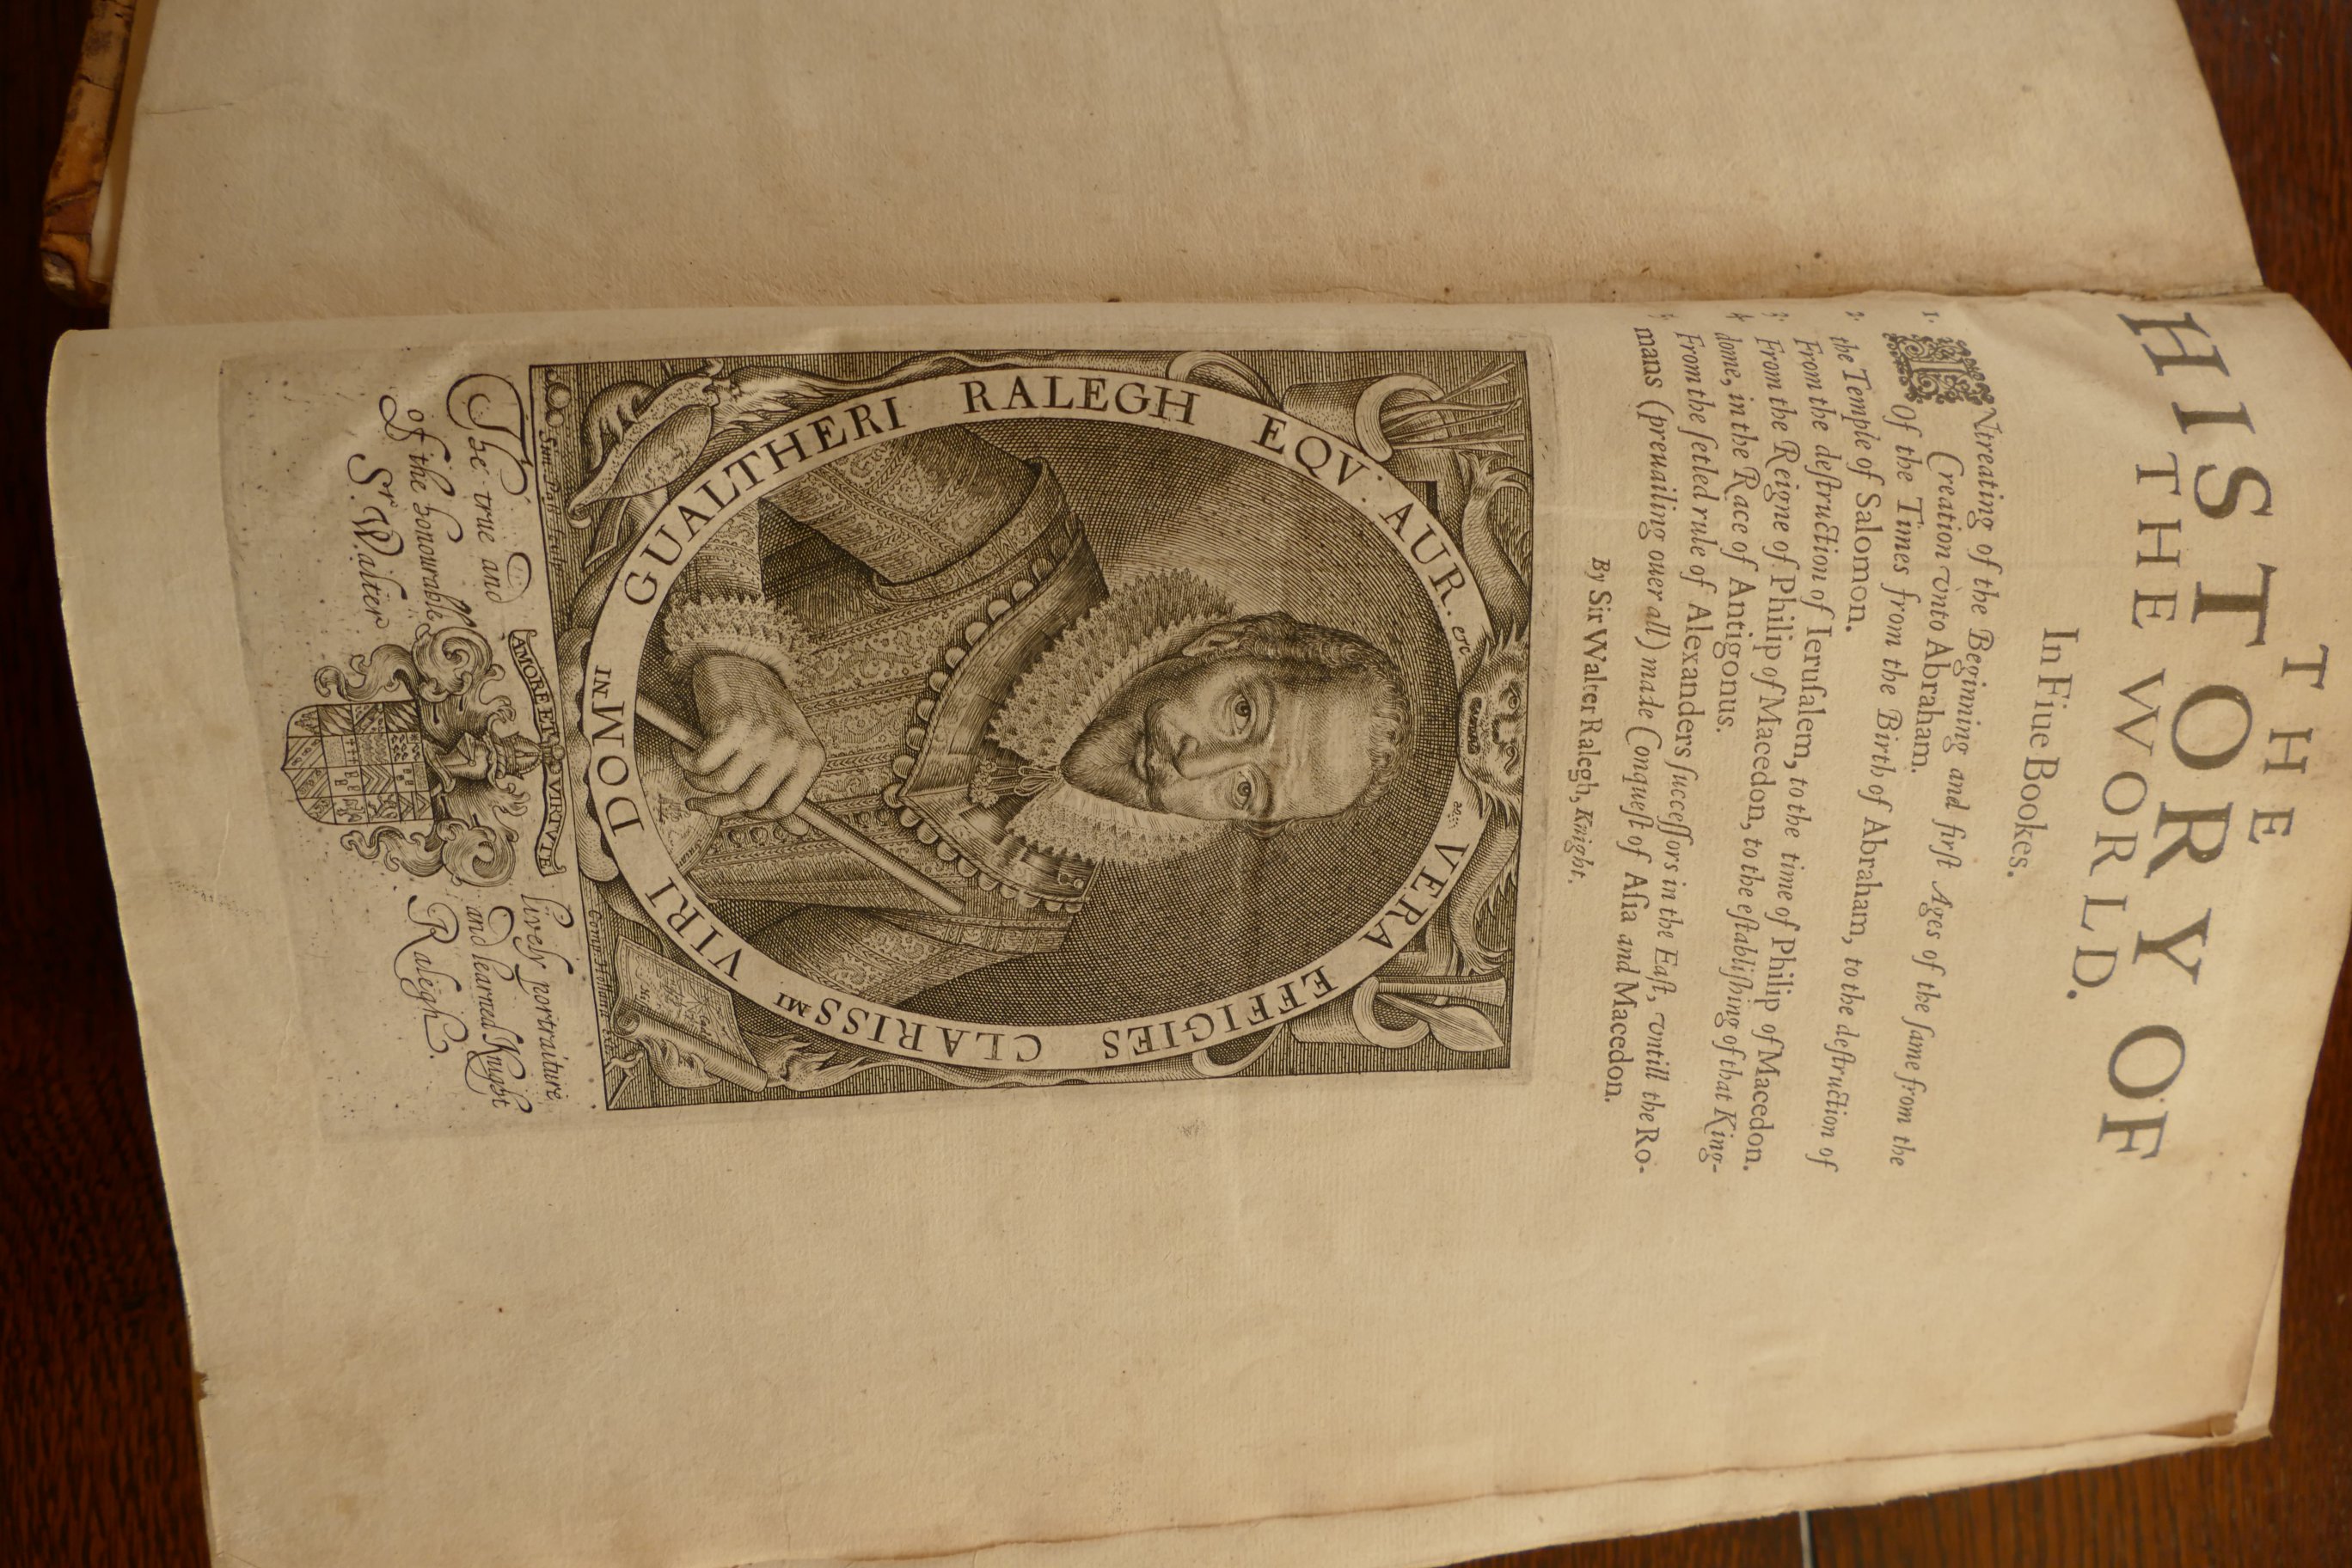 RALEIGH, Sir Walter, History of the World, At London printed for Walter Burne 1614 (1617), folio, - Image 3 of 8